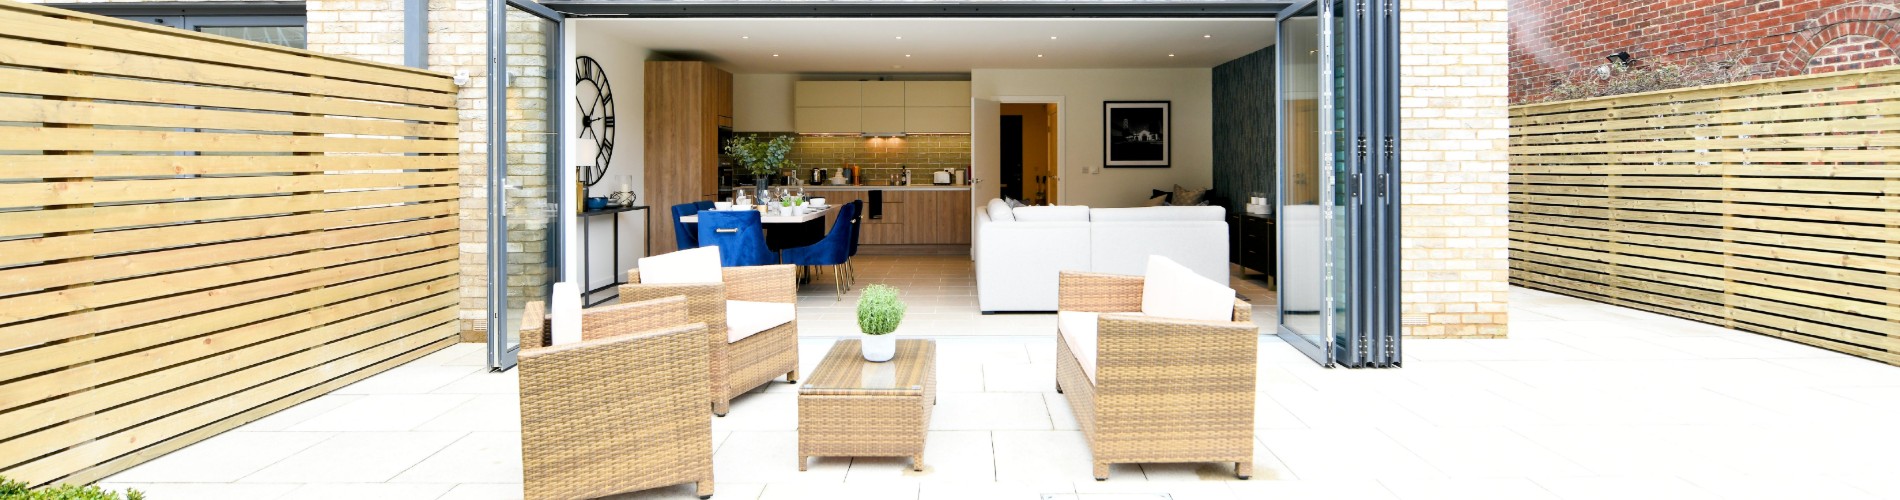 Garden area with stylish wicker furniture and doors folded open fully to reveal kitchen space